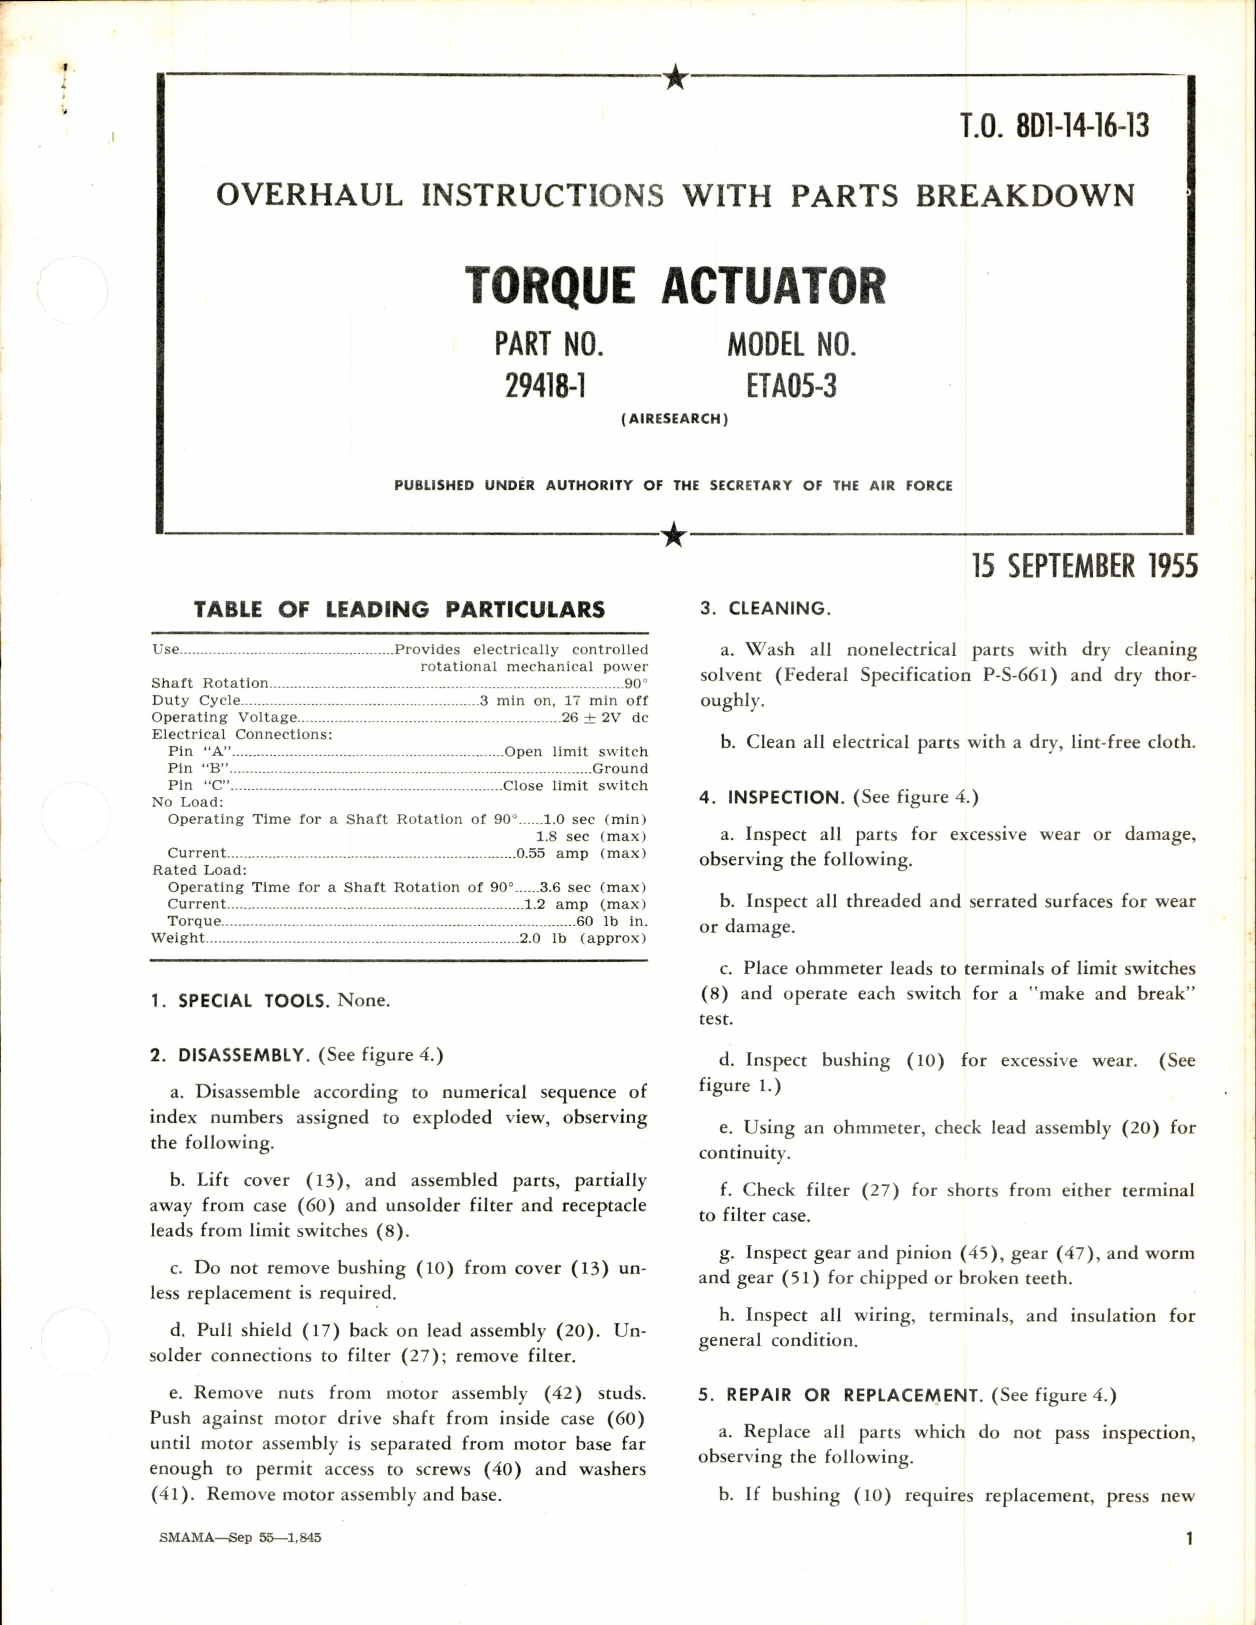 Sample page 1 from AirCorps Library document: Overhaul Instructions w Parts Breakdown Torque Actuator